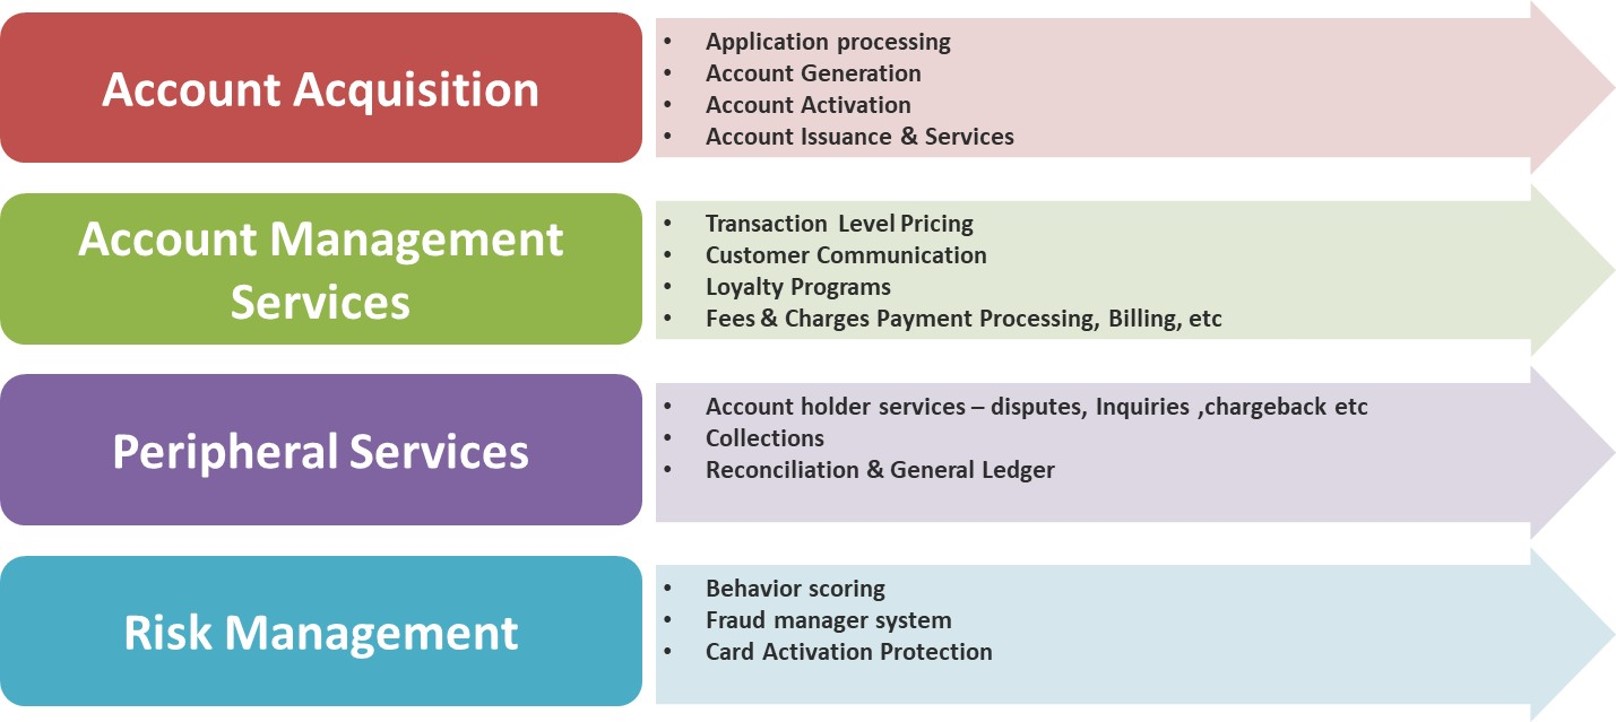 Mphasis | Mainframe - based Credit Card Products